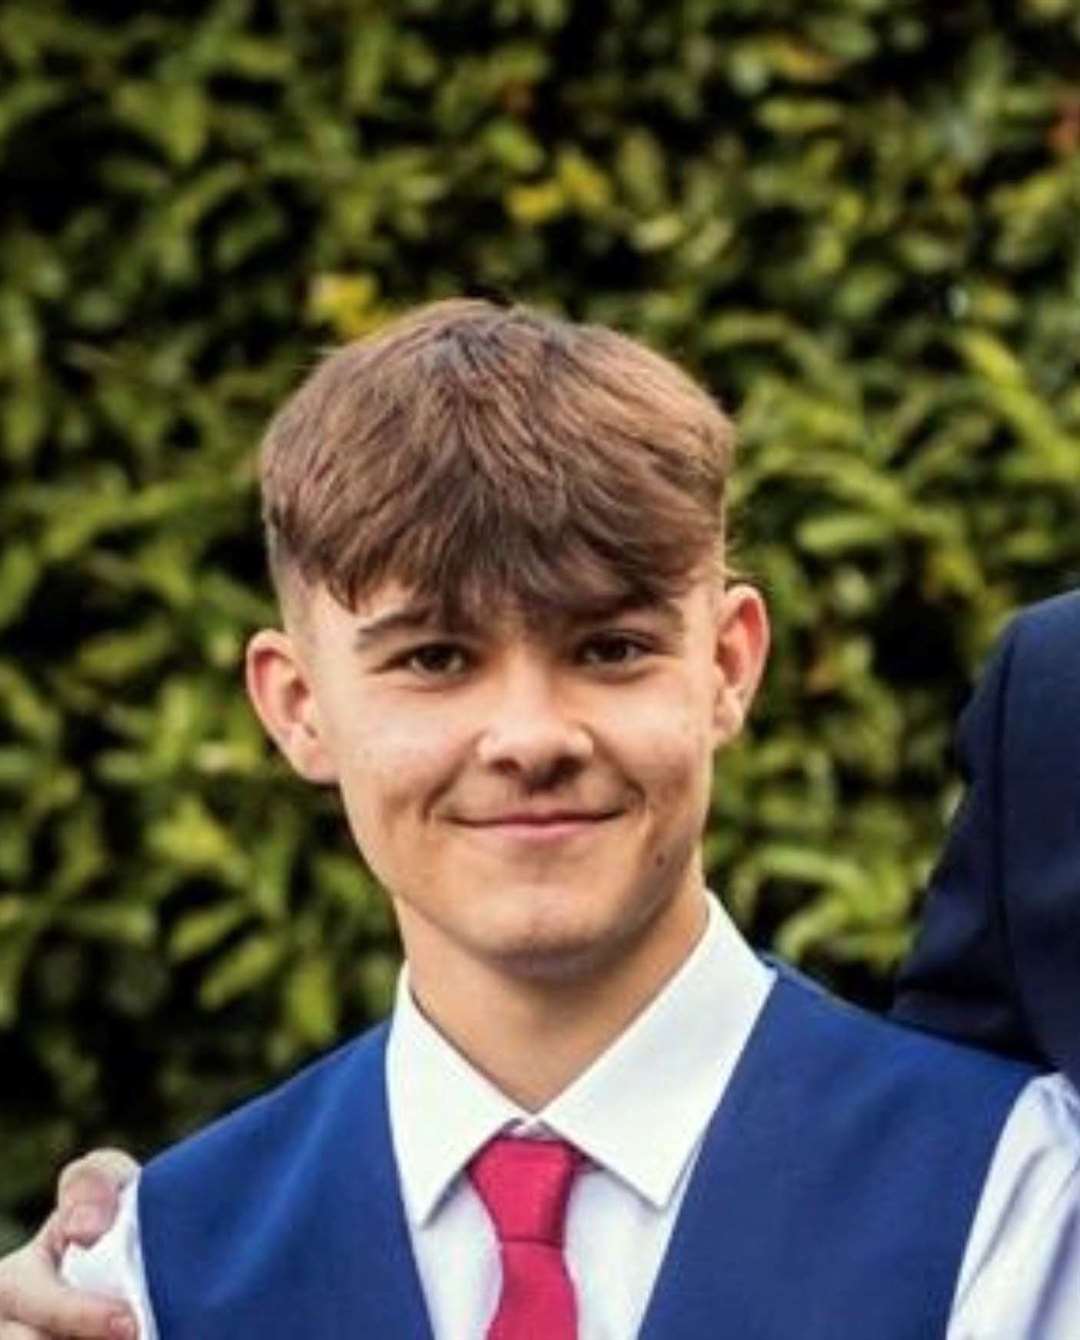 Charlie Cosser, 17, who died after being stabbed multiple times at a party in Warnham, West Sussex (Family handout/Sussex Police/PA)